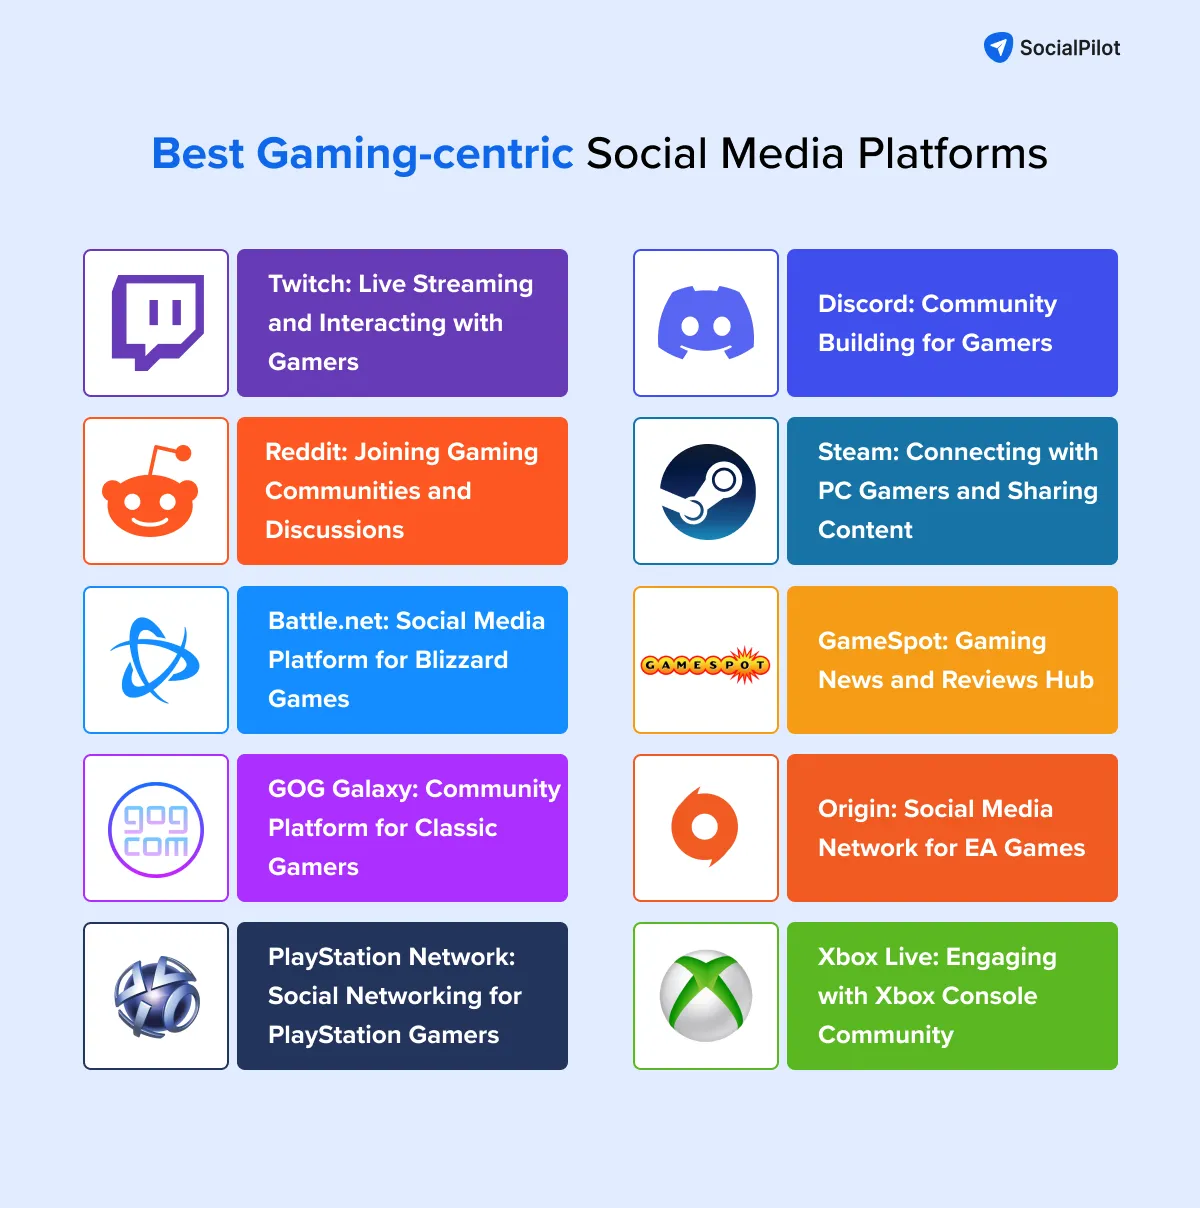 LinkedIn plans to add gaming to its platform